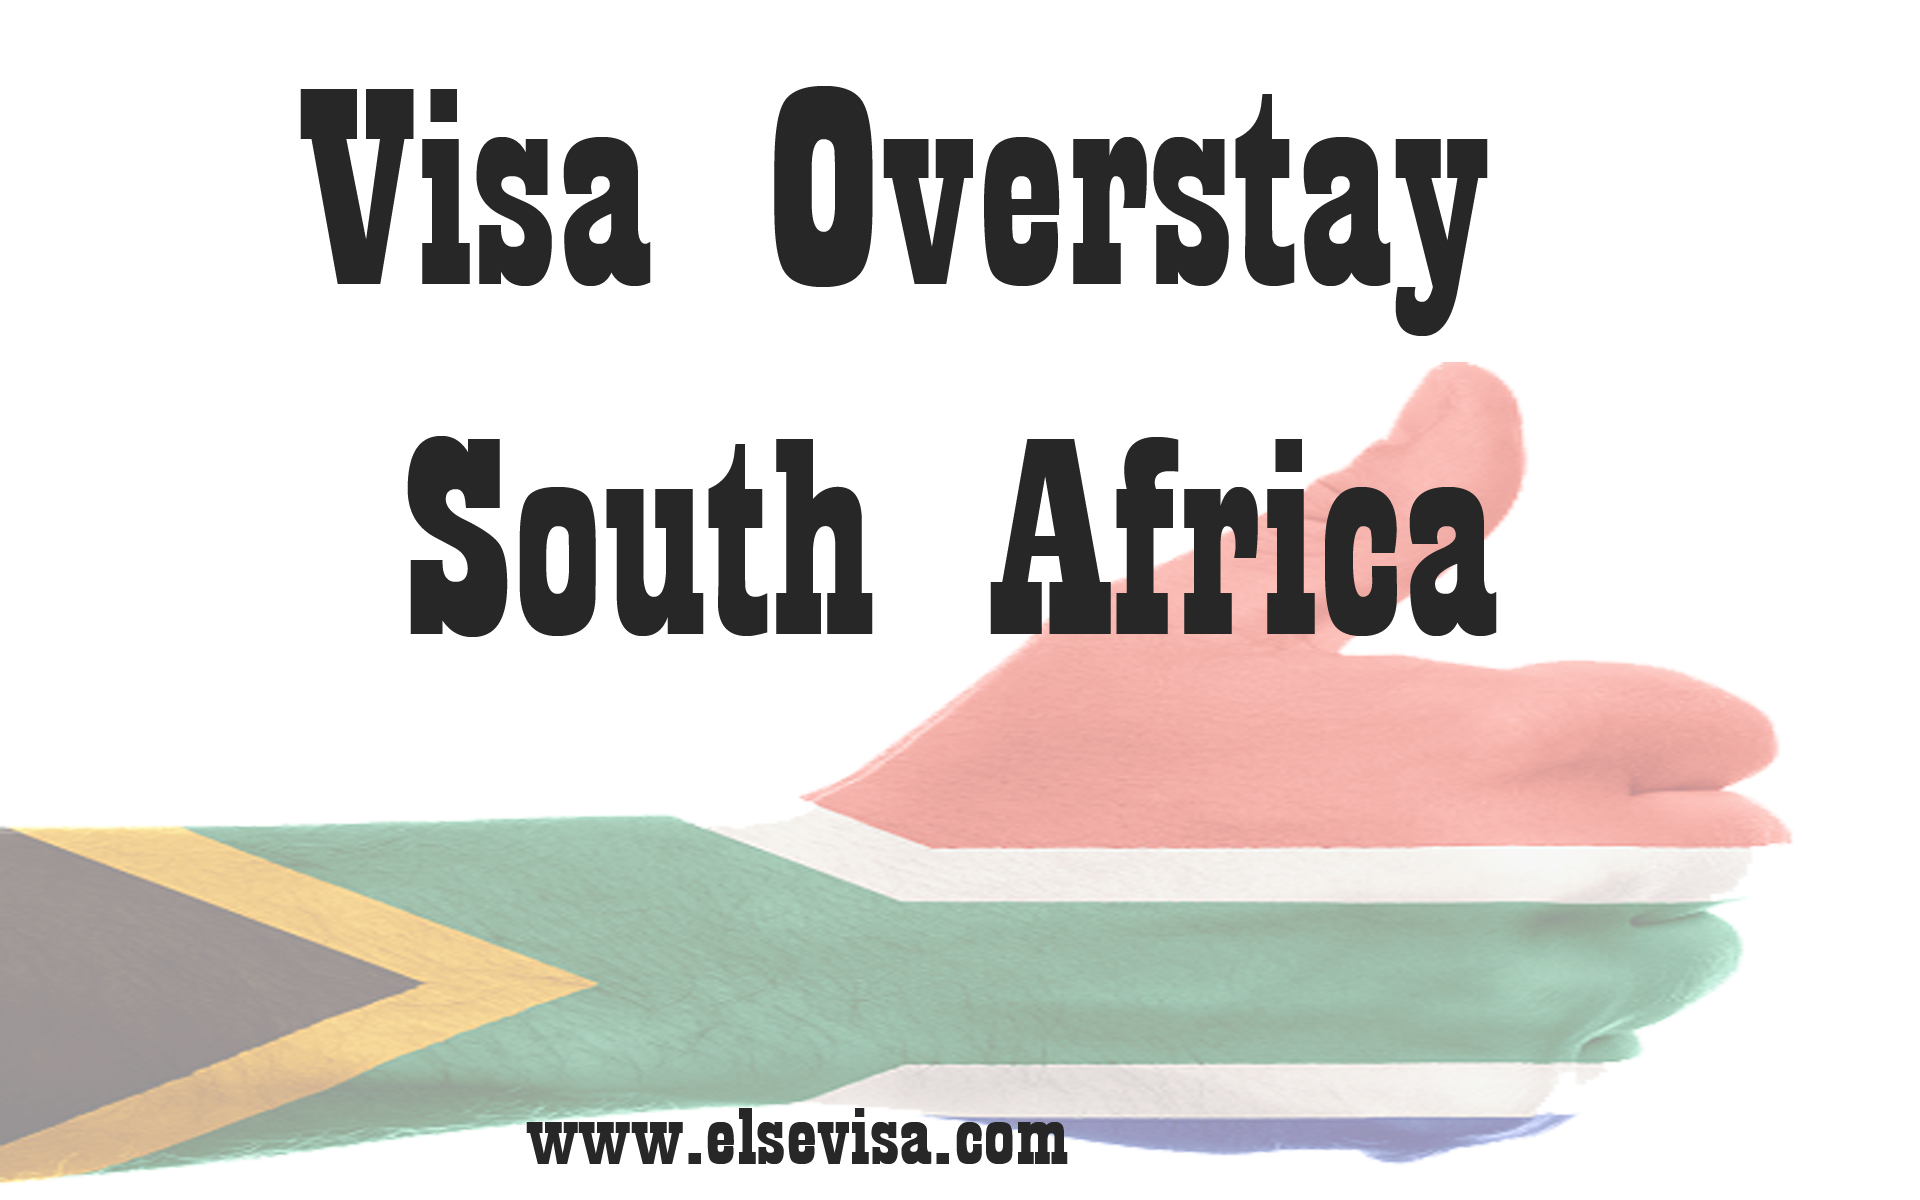 Valid reasons for overstaying visa